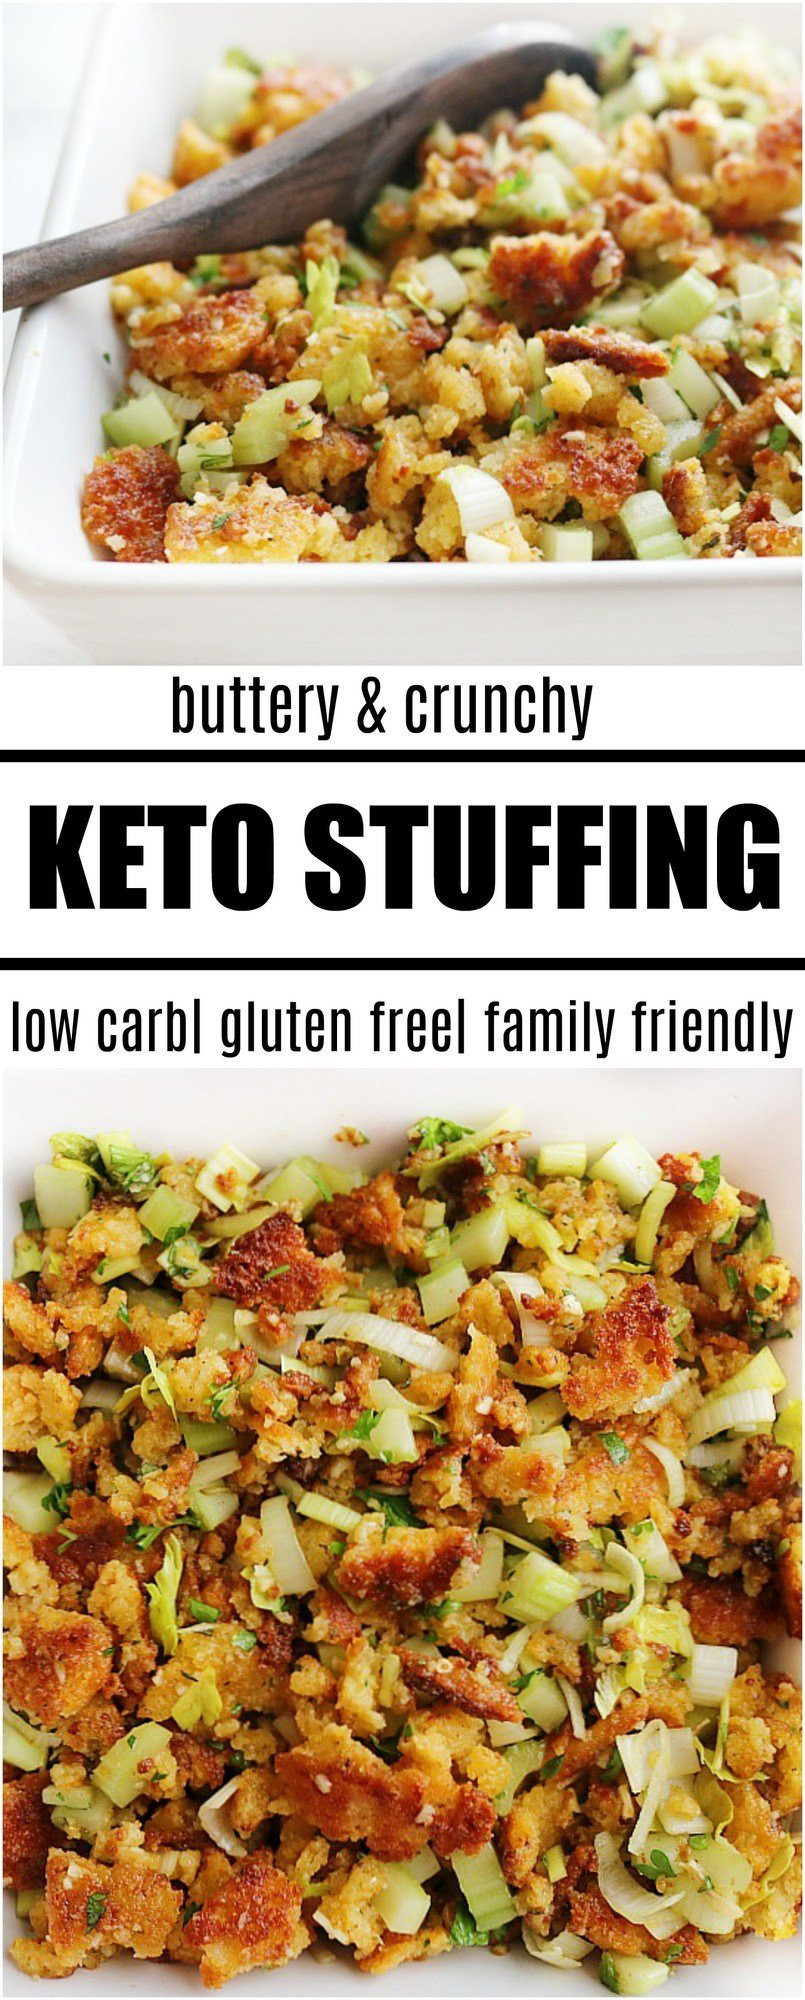 Low Carb Stuffing Recipes
 low carb stuffing alternatives